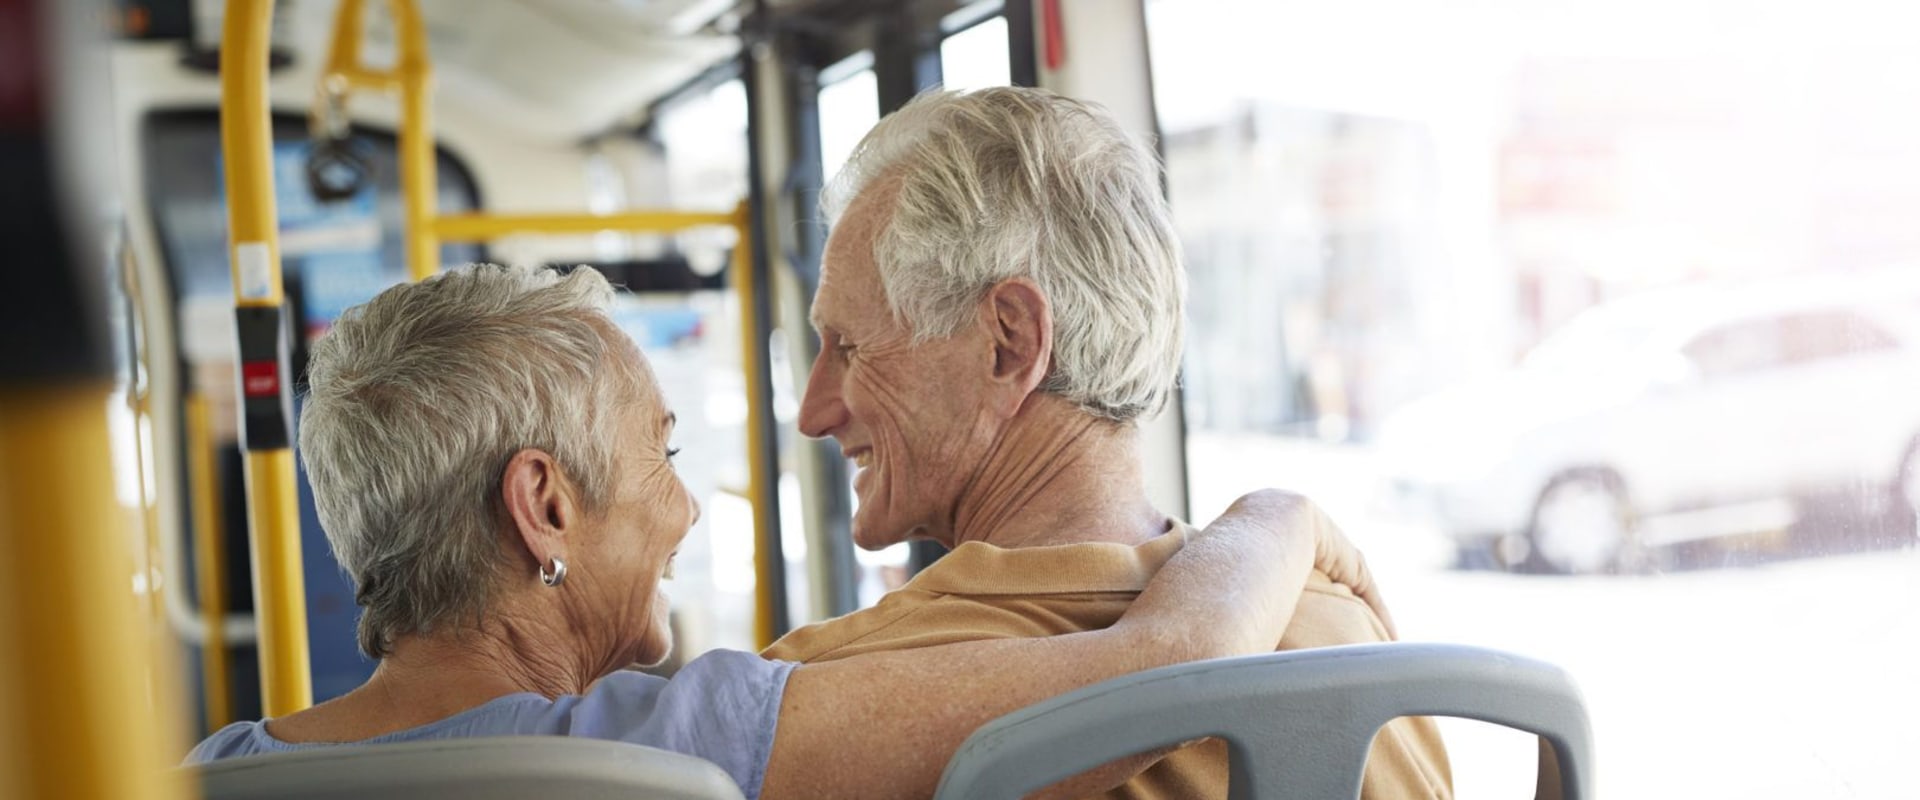 Transportation Services for Elderly Care: What Options Are Available?